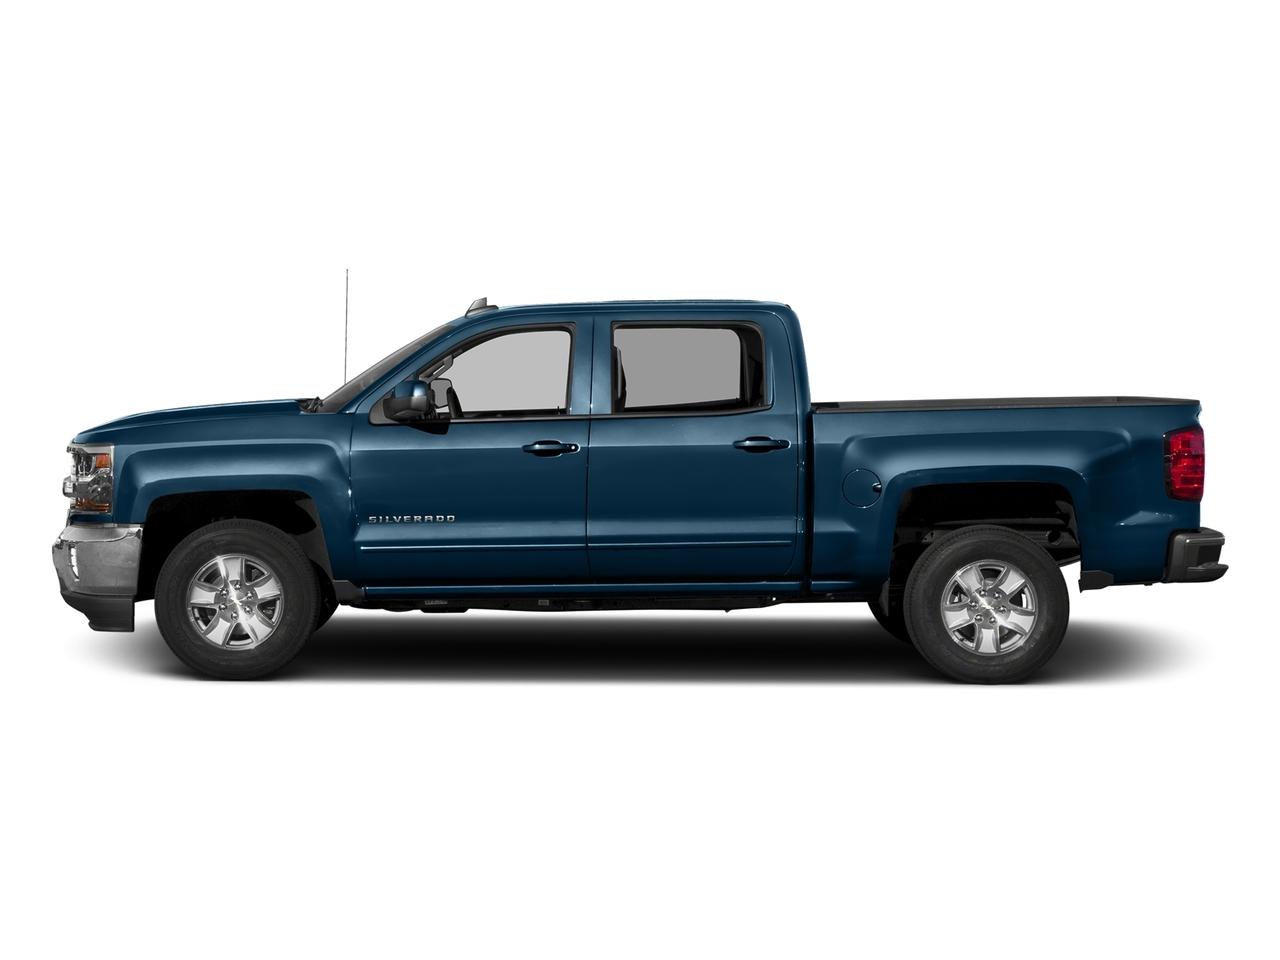 Used 2017 Chevrolet Silverado 1500 LT with VIN 1GCUKREC1HF208240 for sale in Little Rock